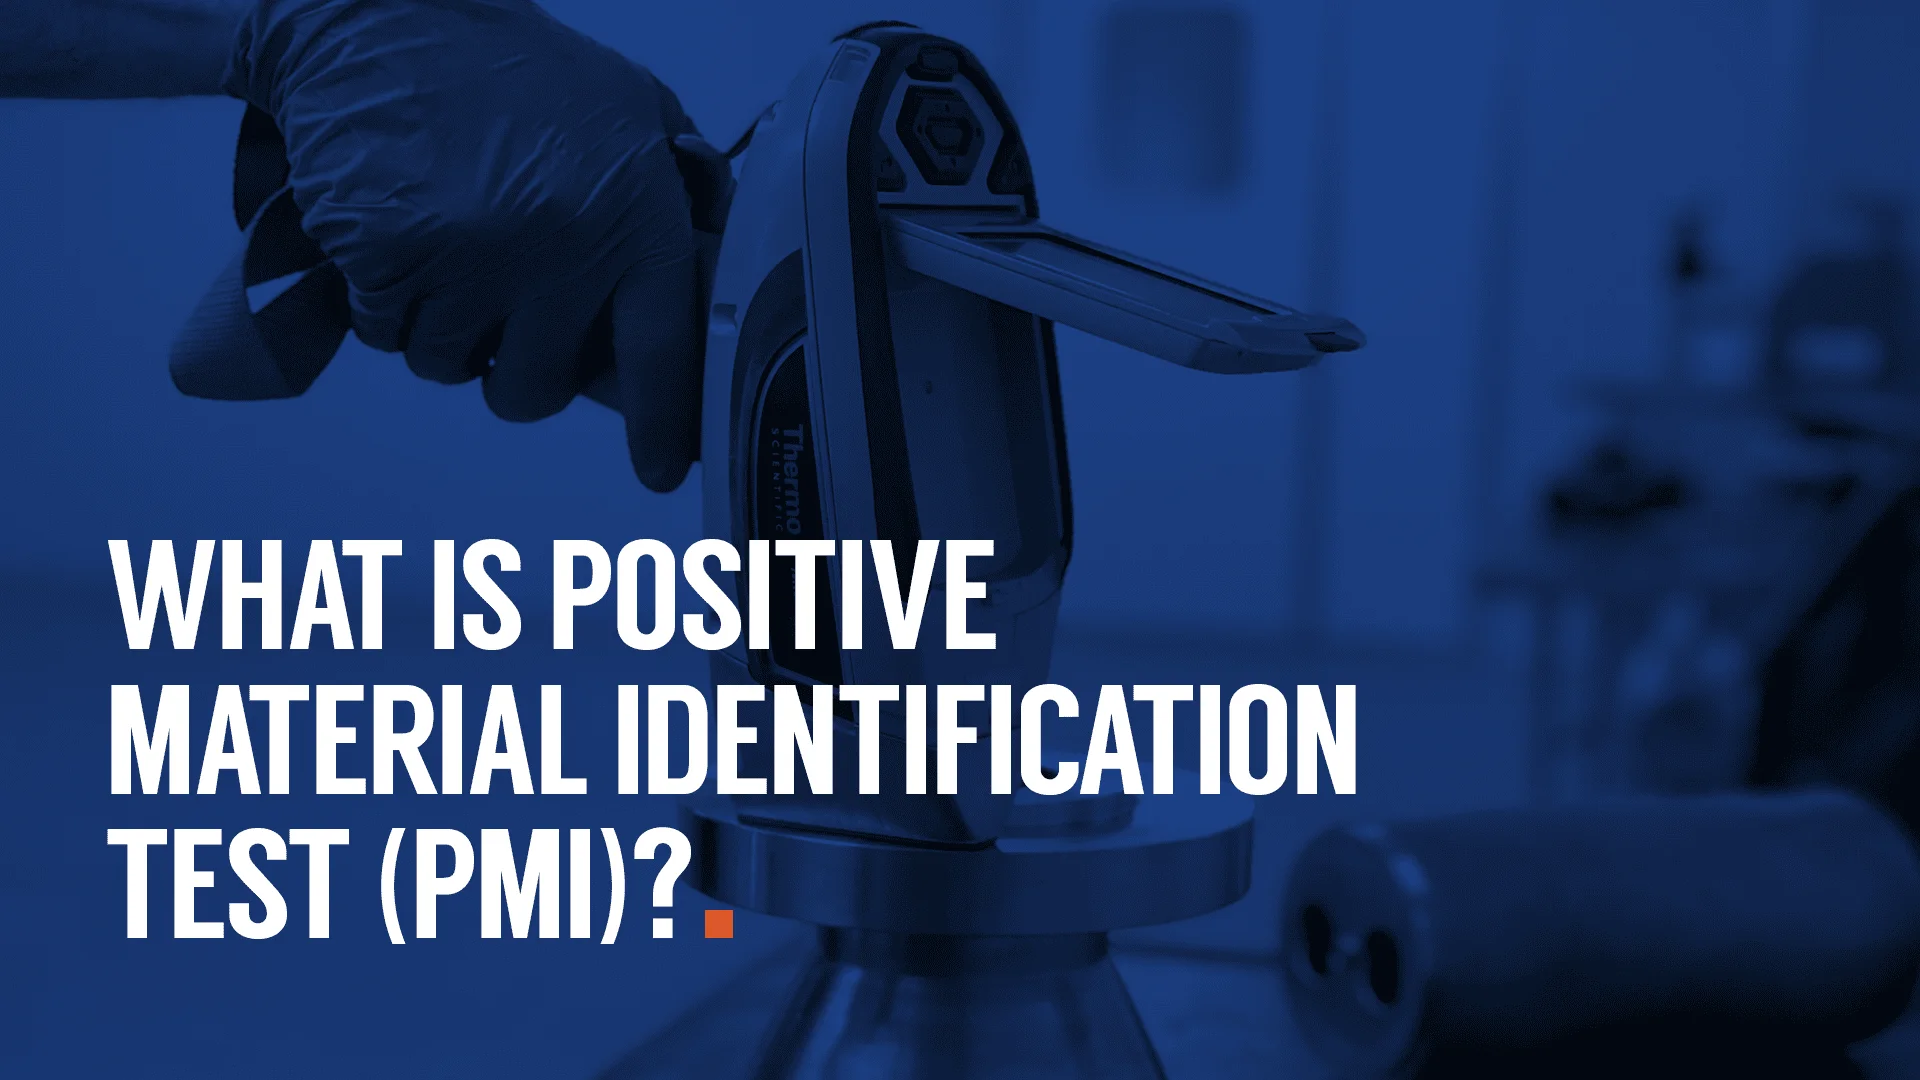 What is positive material identification test (PMI)?